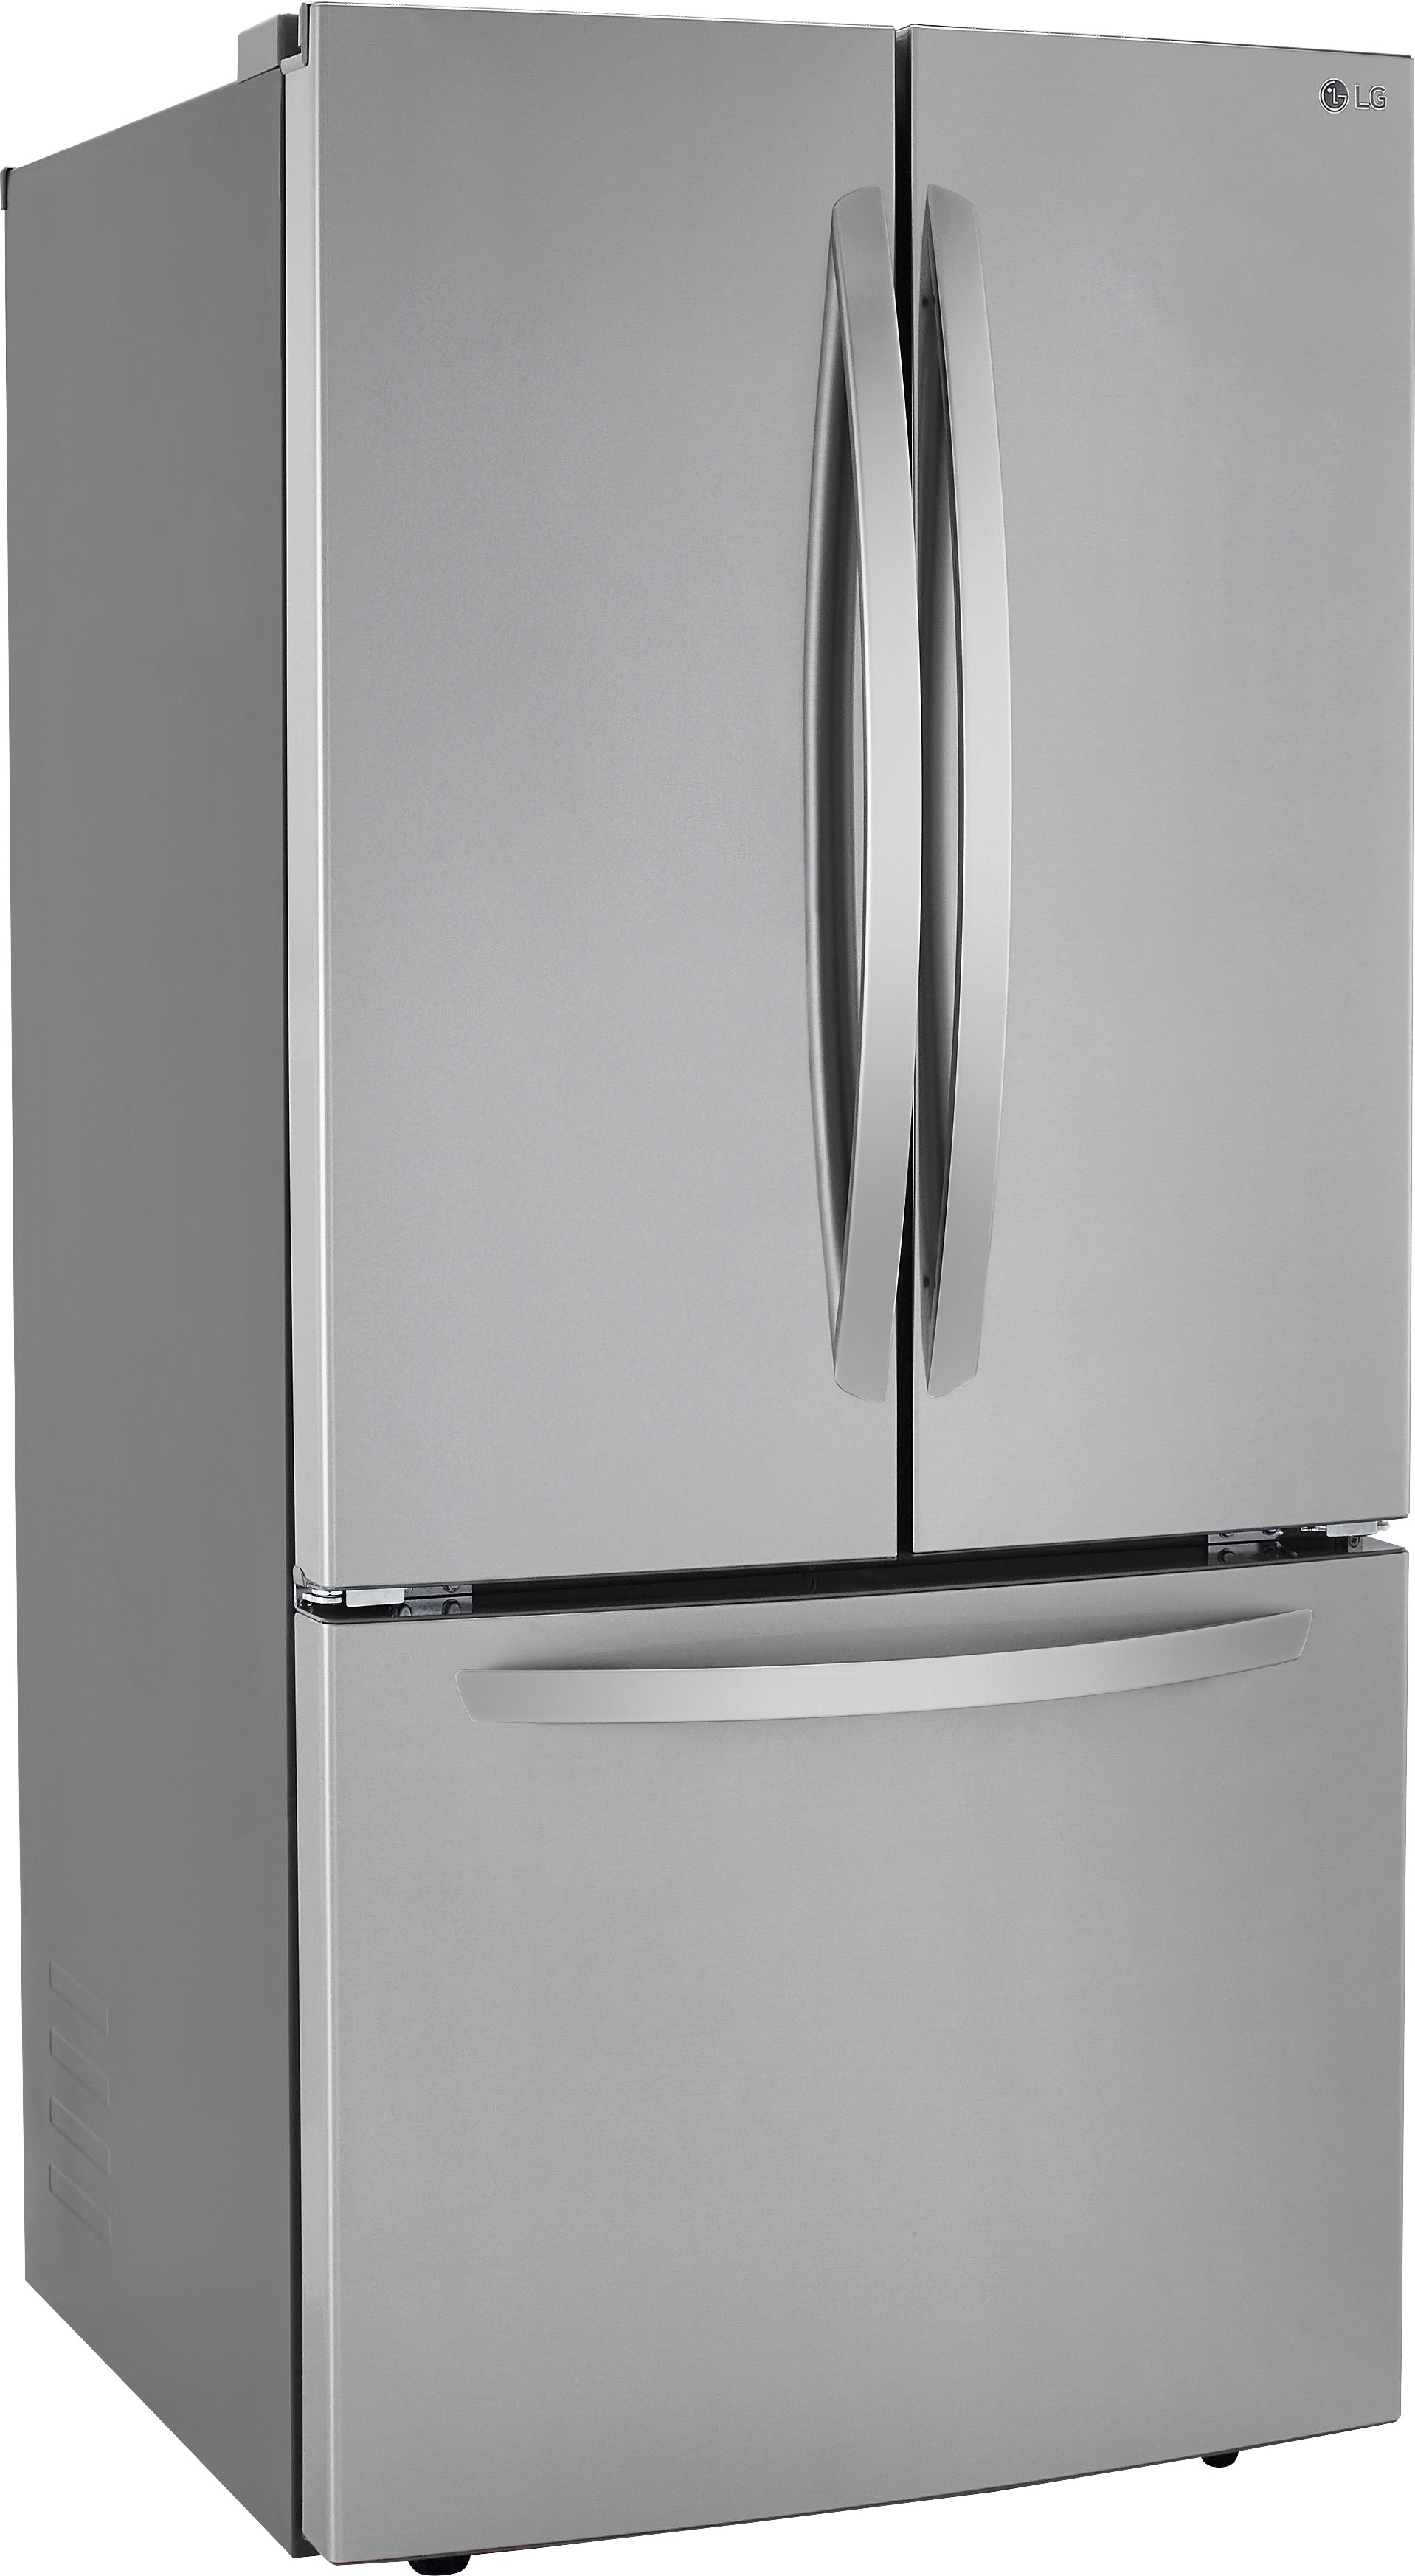 Angle View: LG - 25.1 Cu. Ft. French Door Refrigerator with Ice Maker - Stainless steel